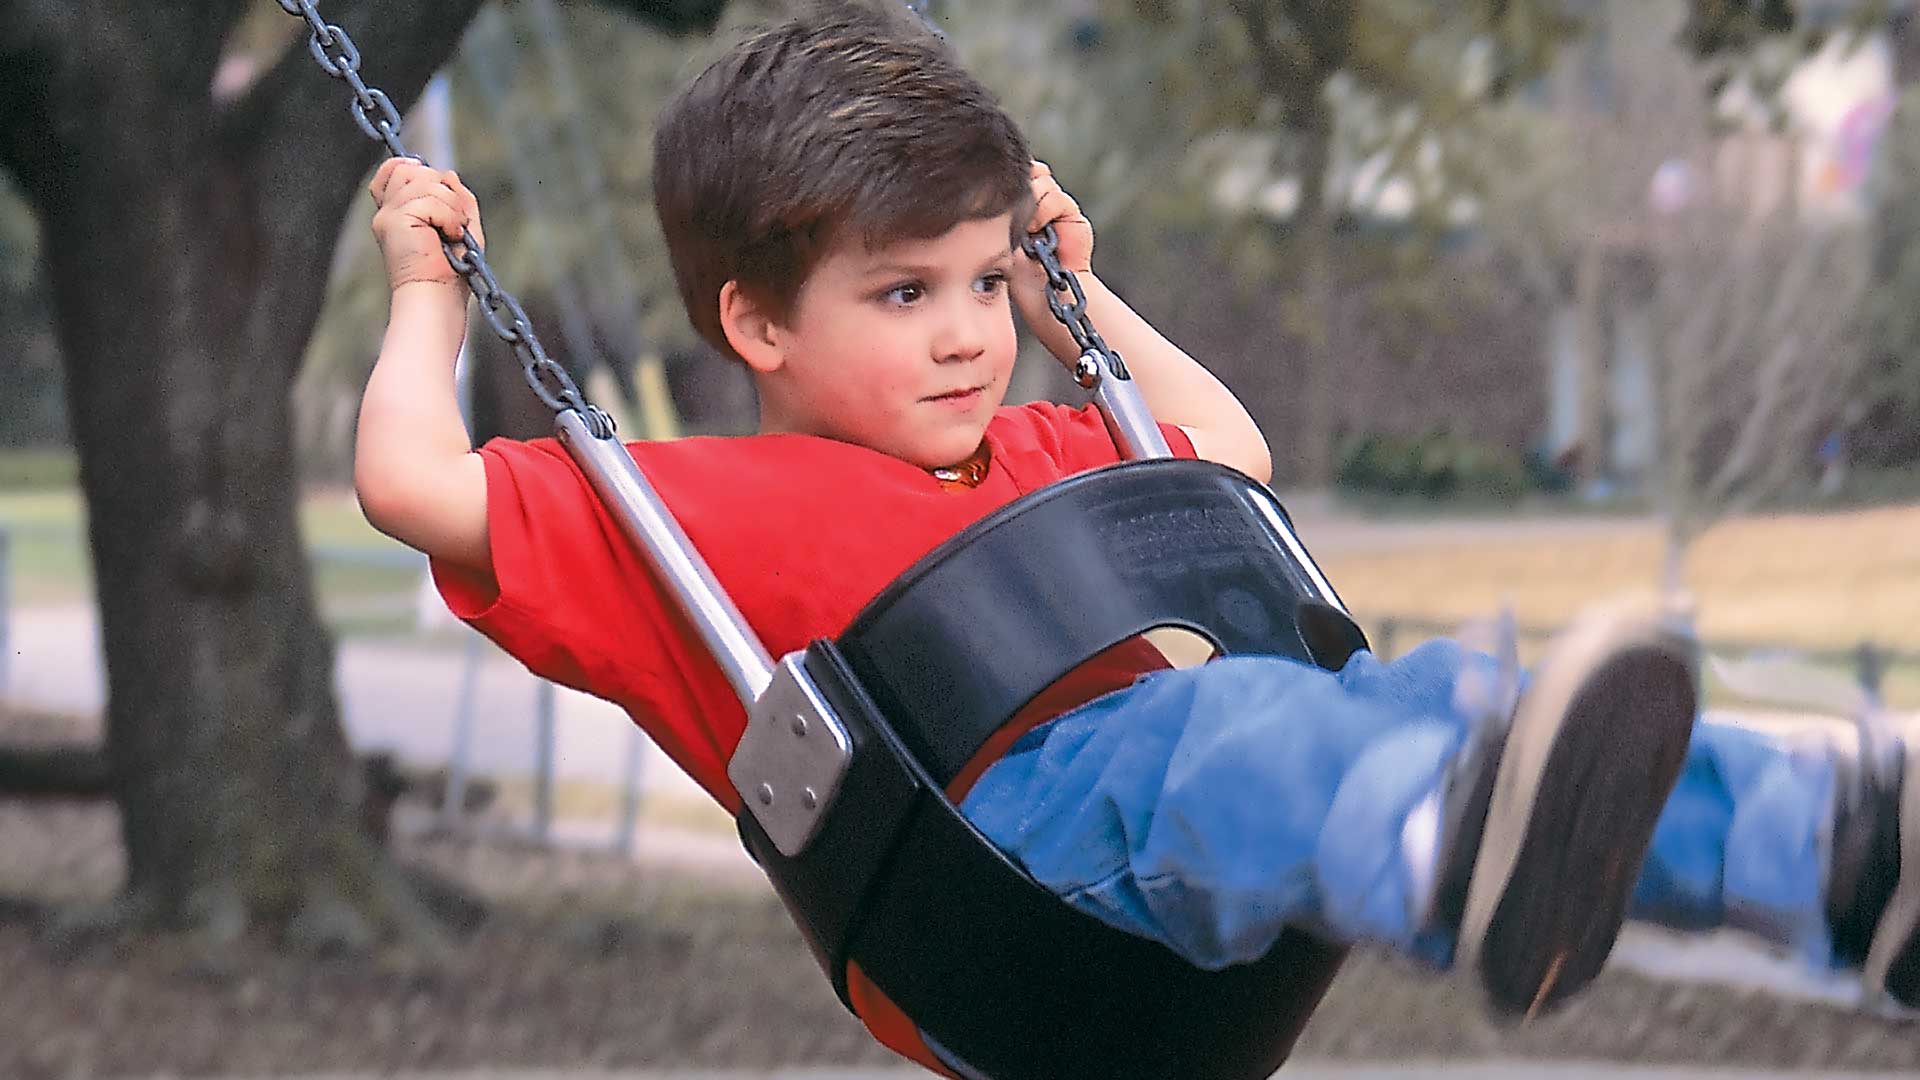 Swings Stimulate Both Bodies and Brains